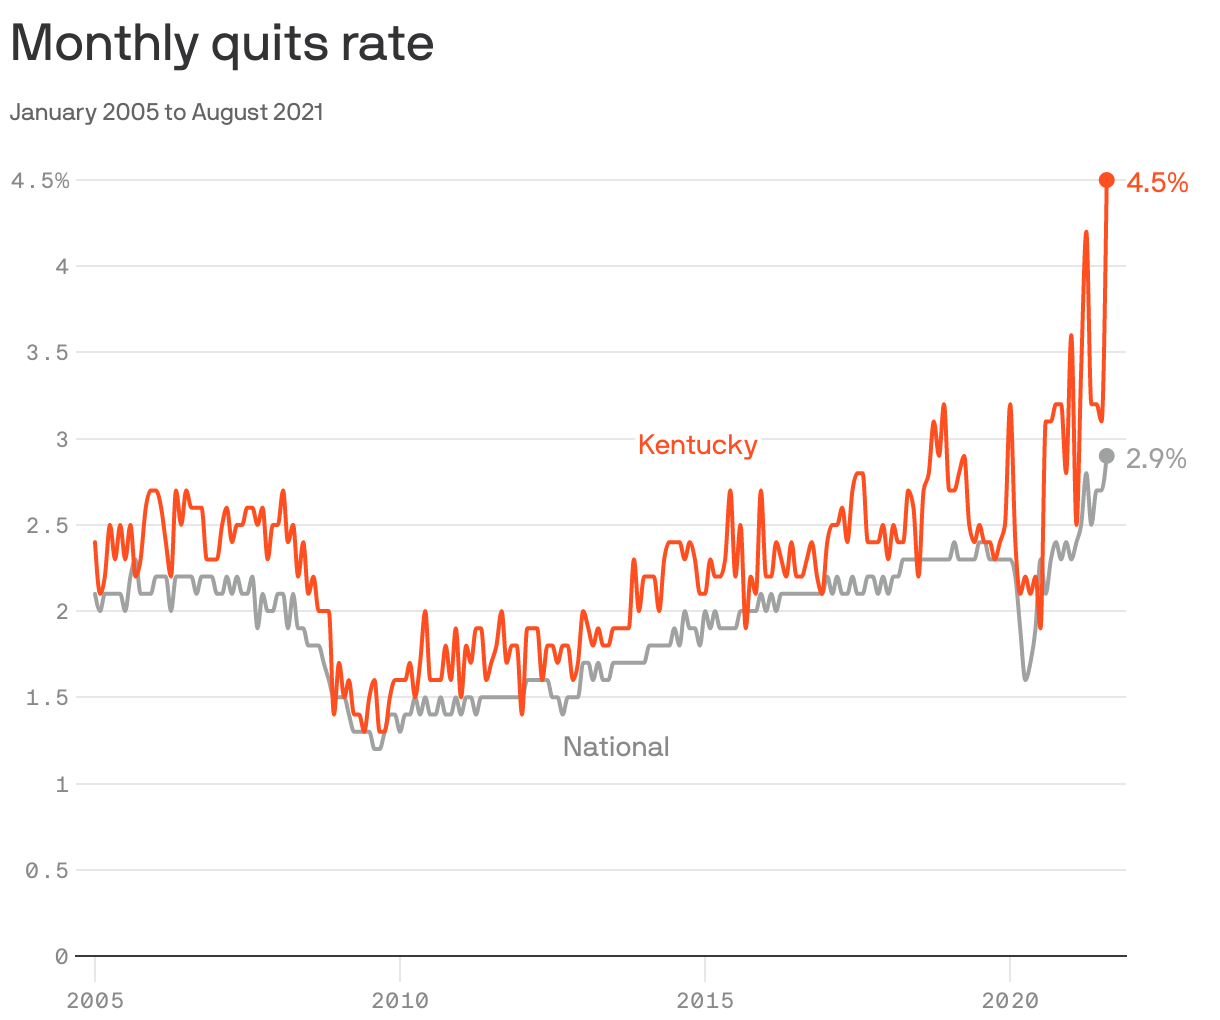 Monthly quits rate